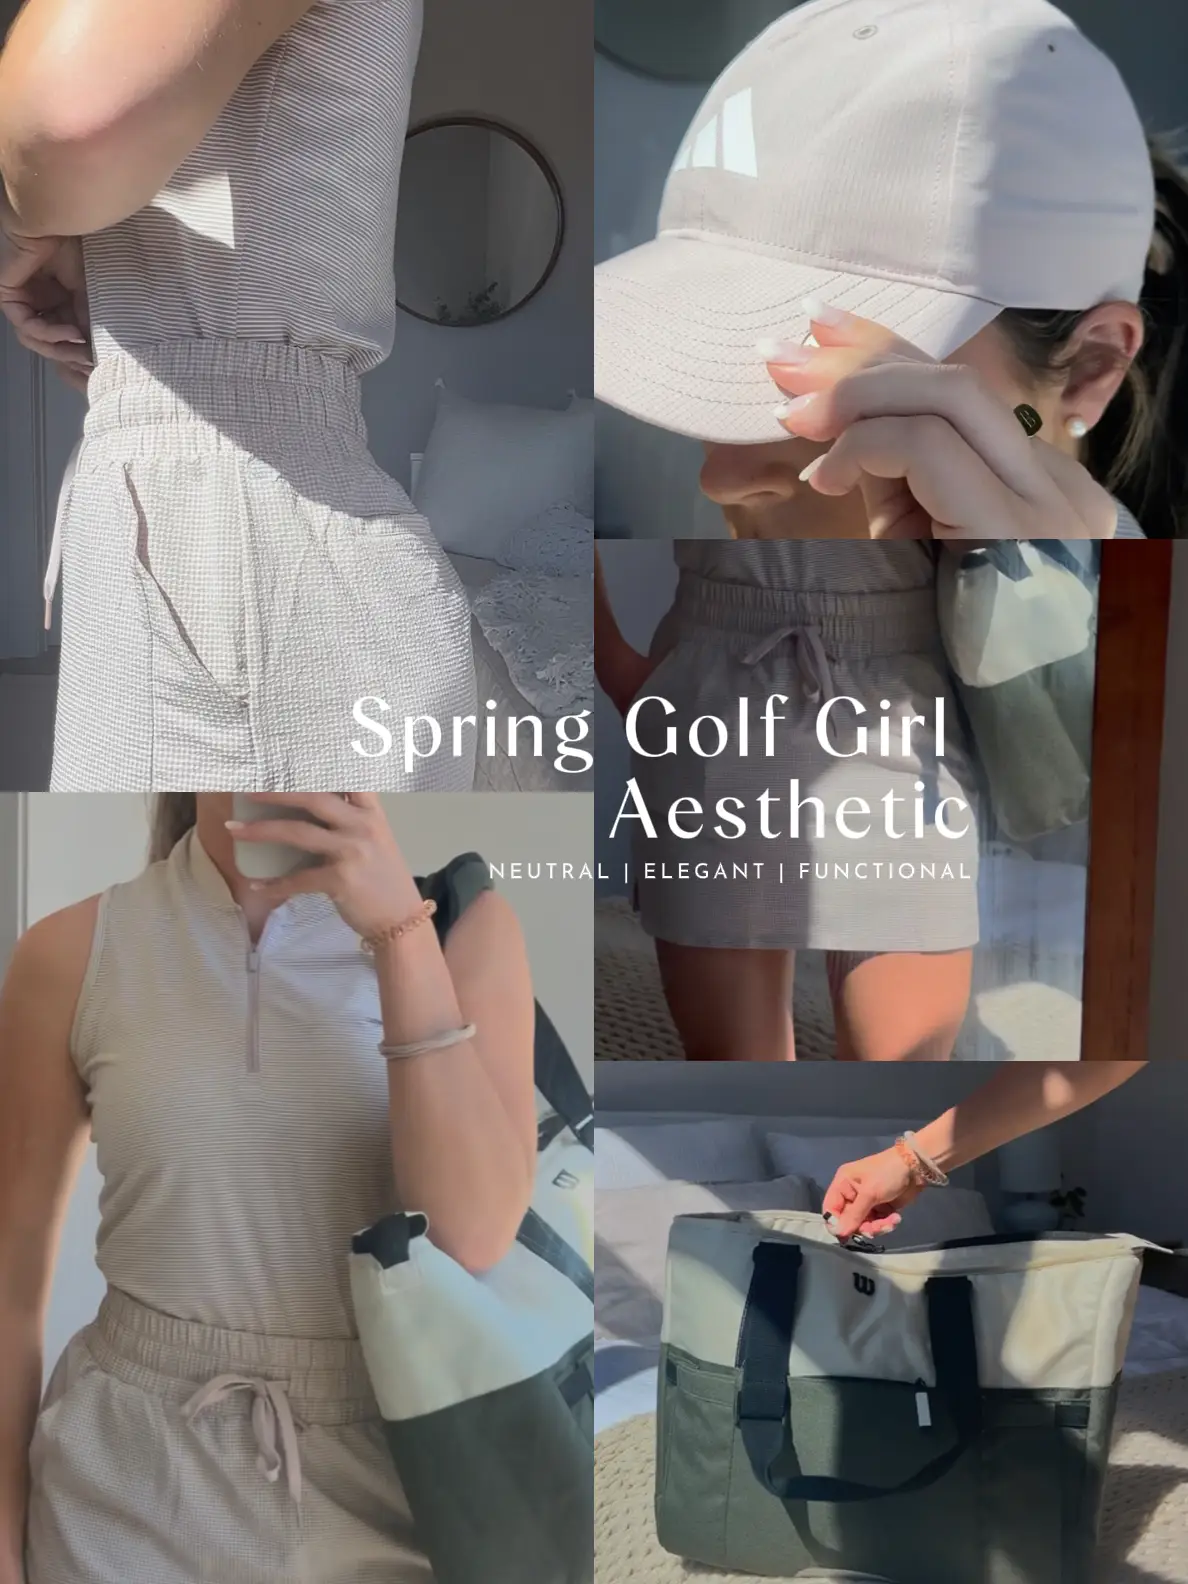 Tennis Skirt Outfit Ideas That are Perfect for Summer – Denise Cronwall  Activewear